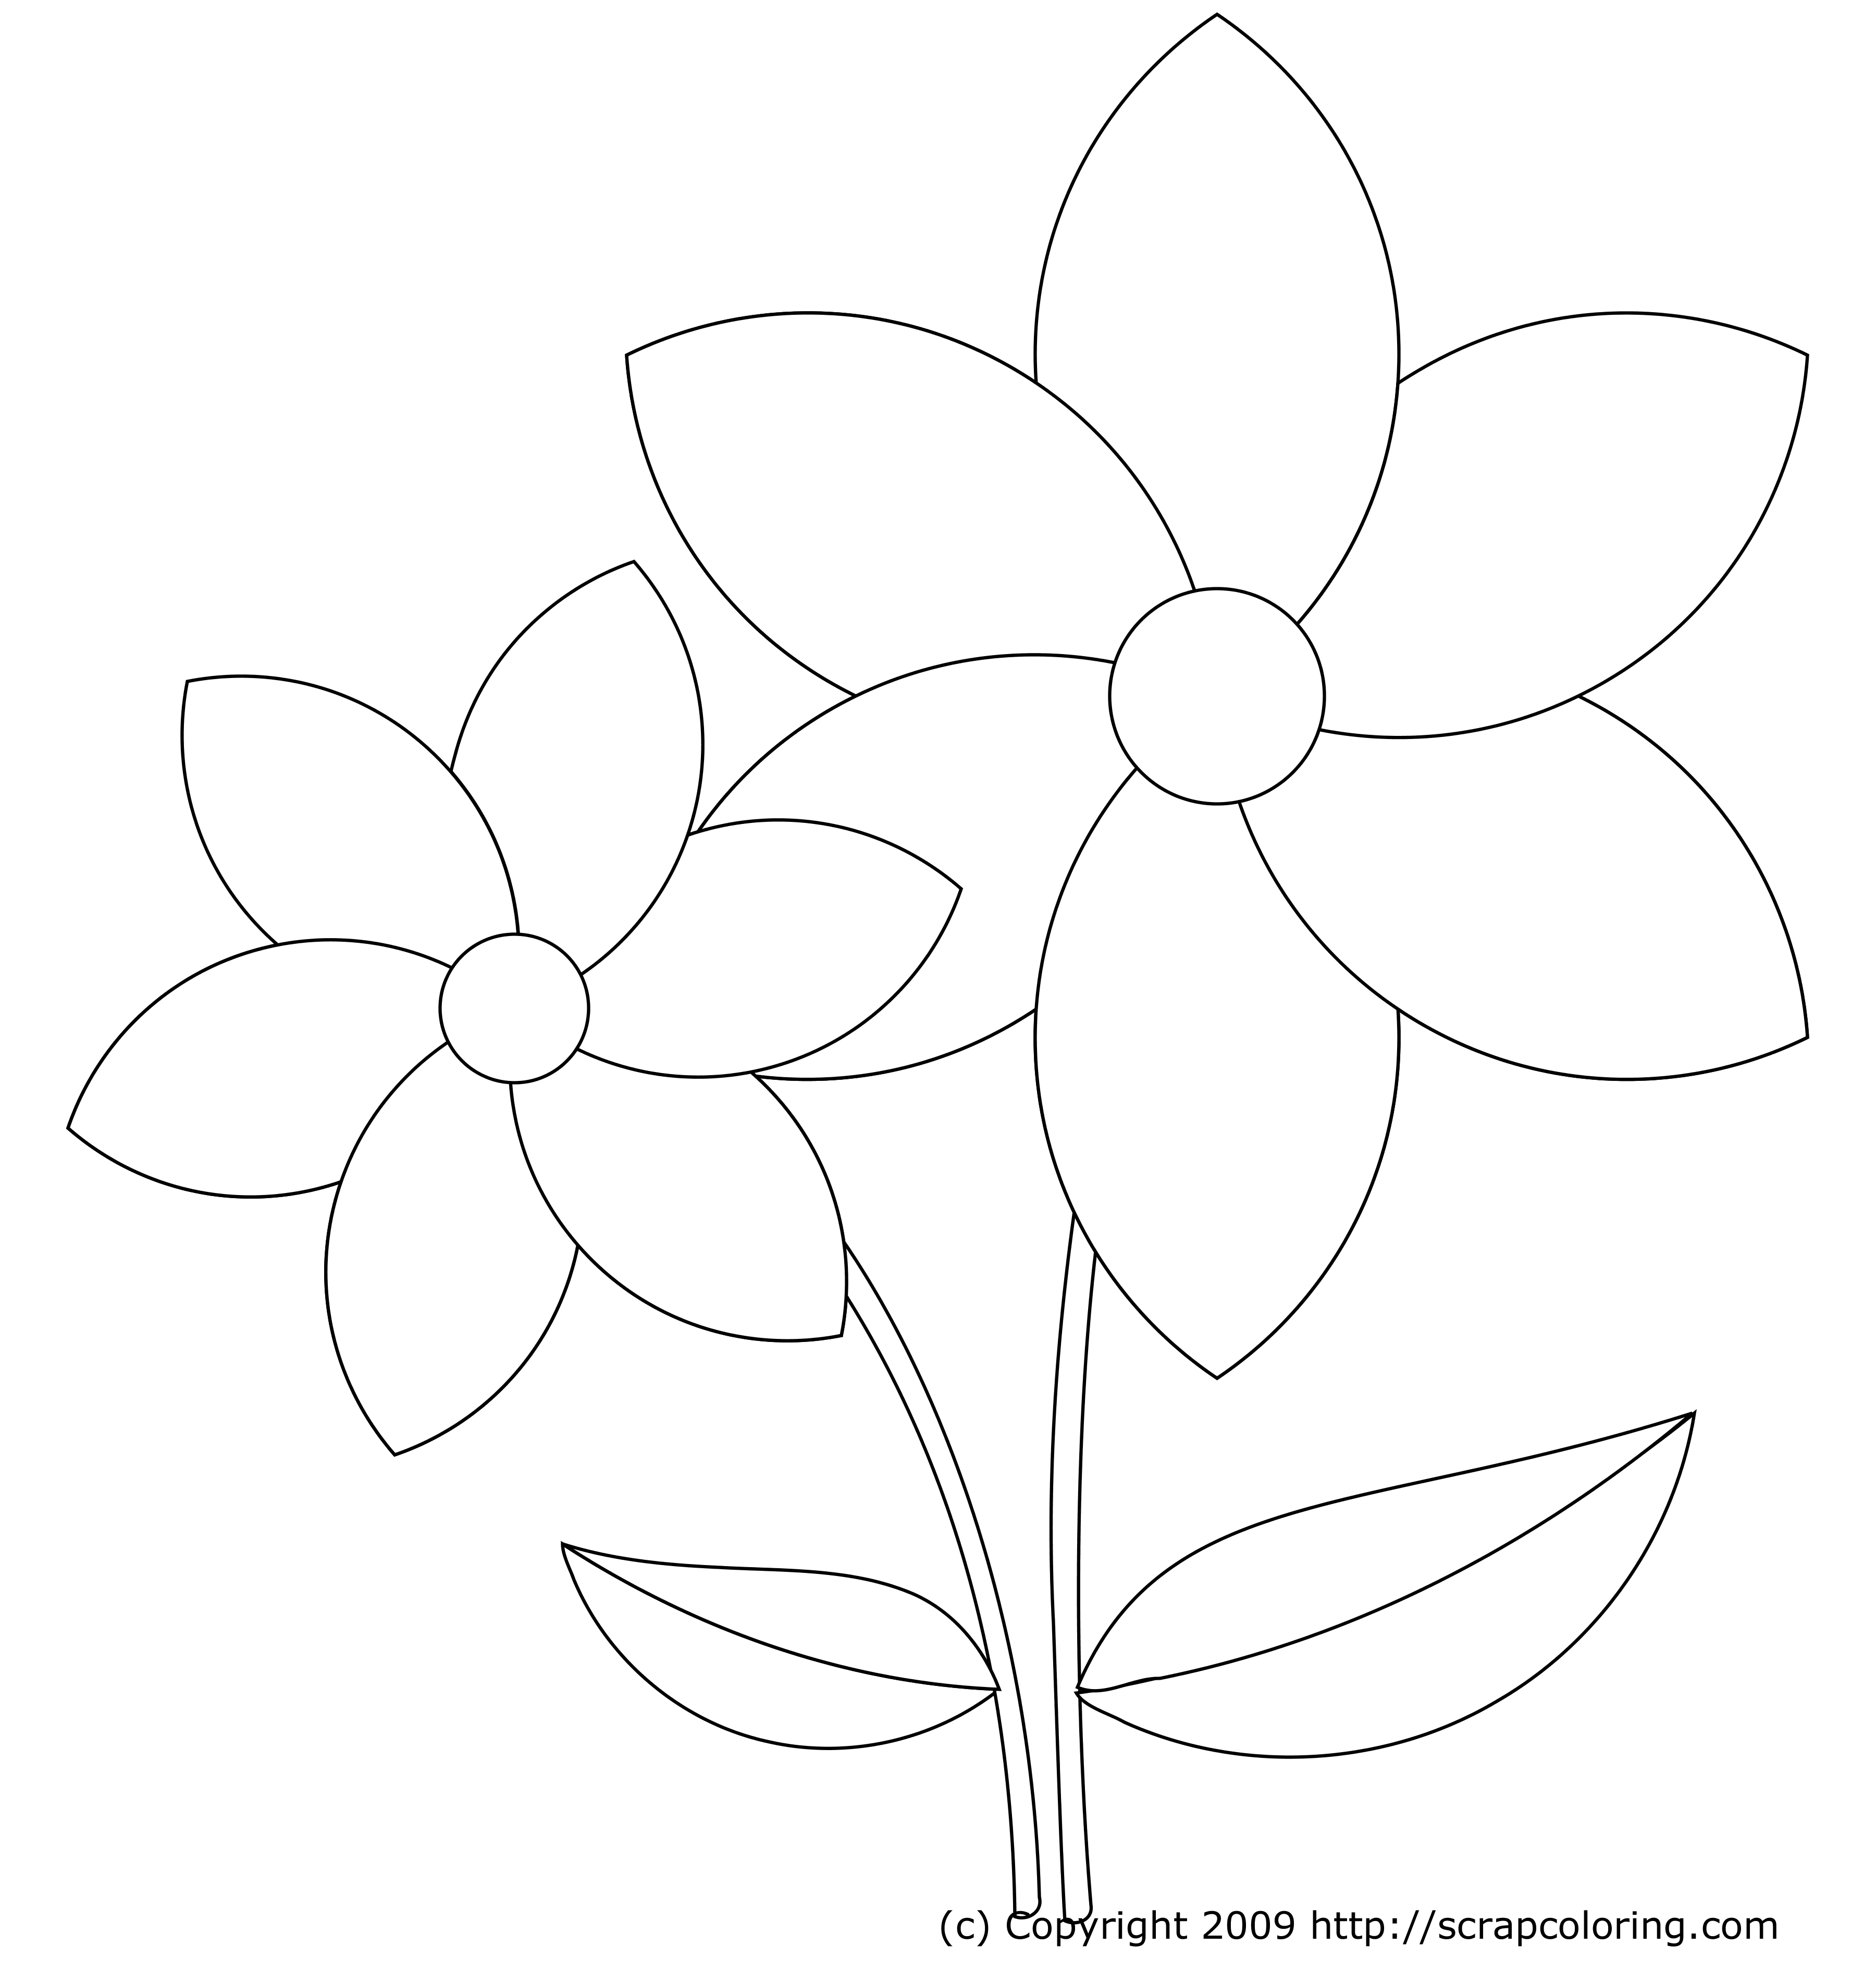 Flower Coloring Pages Printable For S | High Quality Coloring Pages